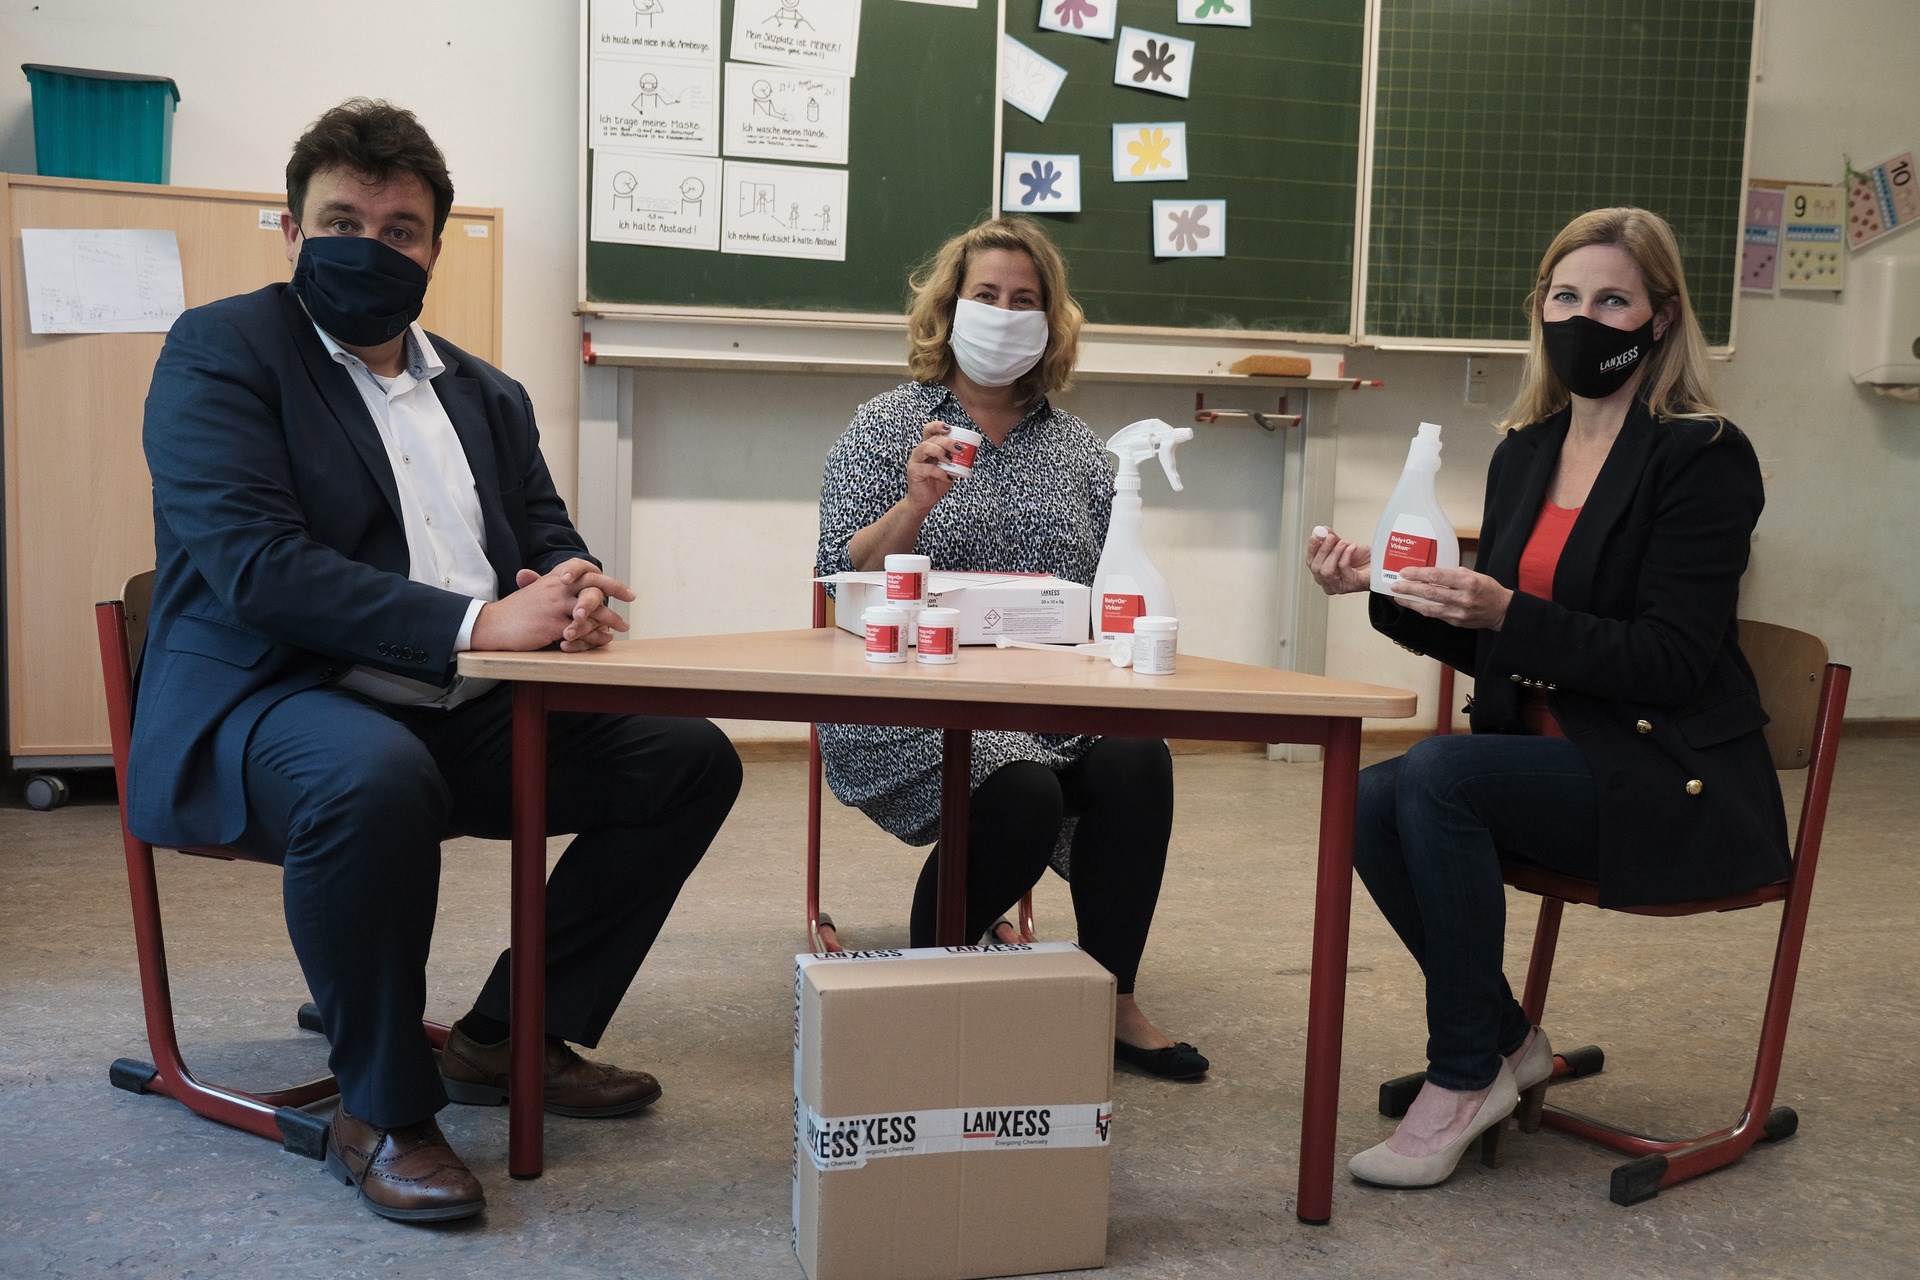 On behalf of all Krefeld schools, Nina Hasenkamp, head of the LANXESS education initiative, hands over a package containing the disinfectant Rely+On Virkon to the headmistress of GGS im Krähenfeld, D. Schrader, and the deputy of the city of Krefeld, Markus Schön.